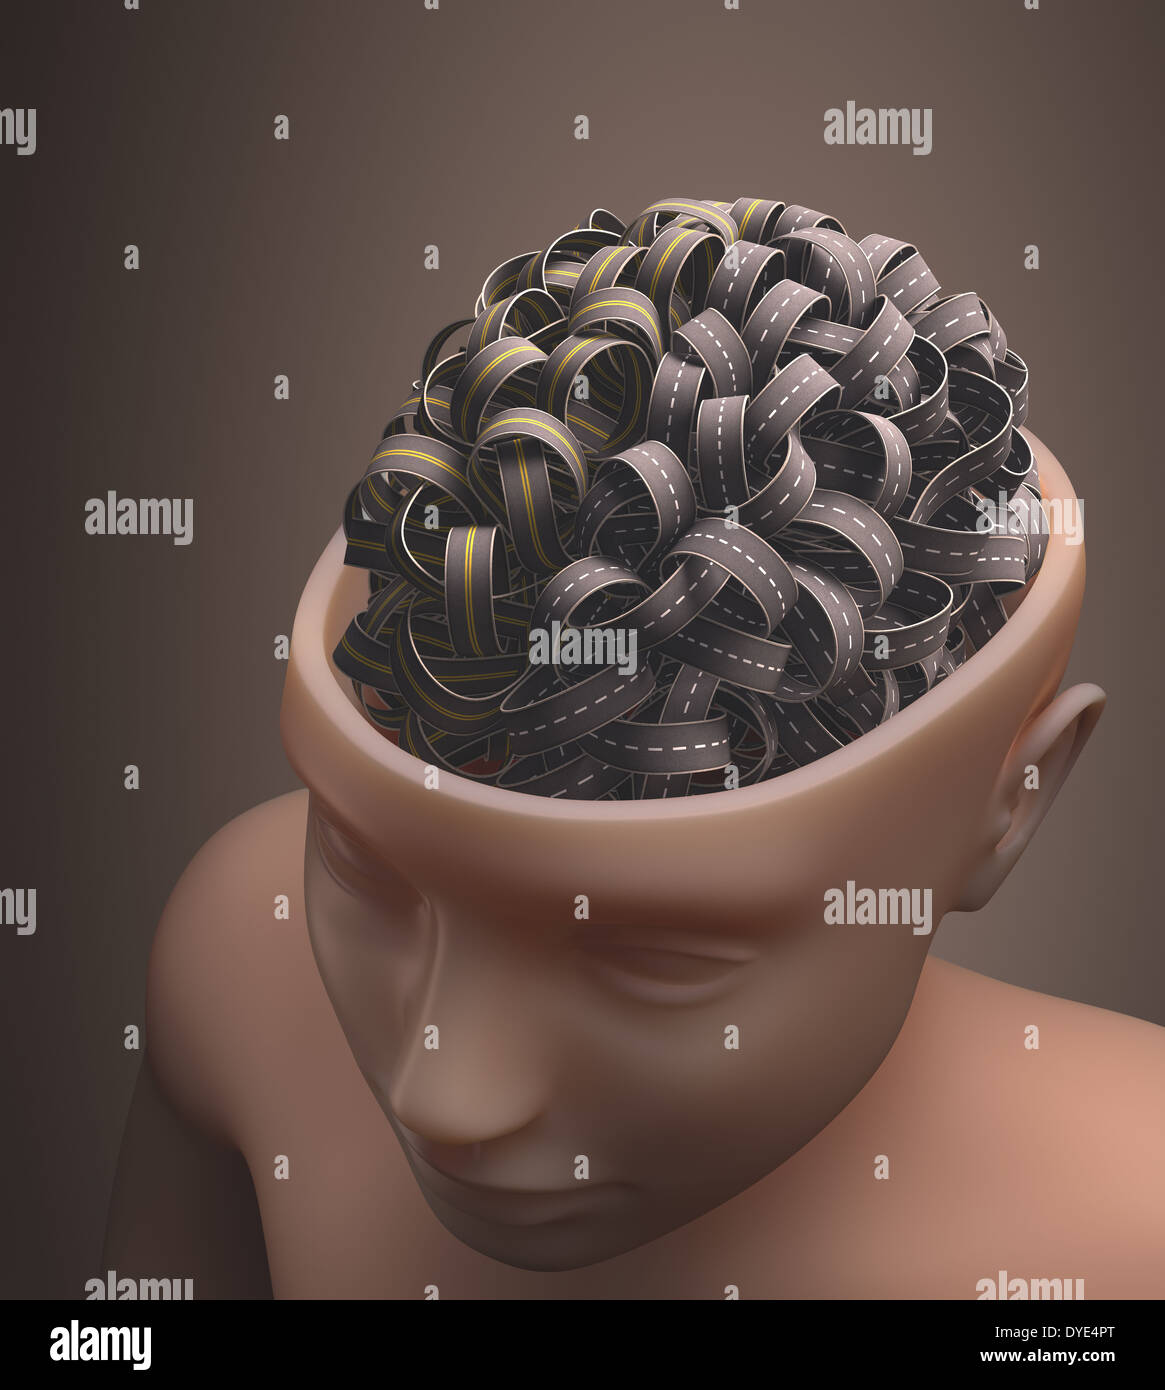 Several roads forming the human brain. Clipping path included. Stock Photo